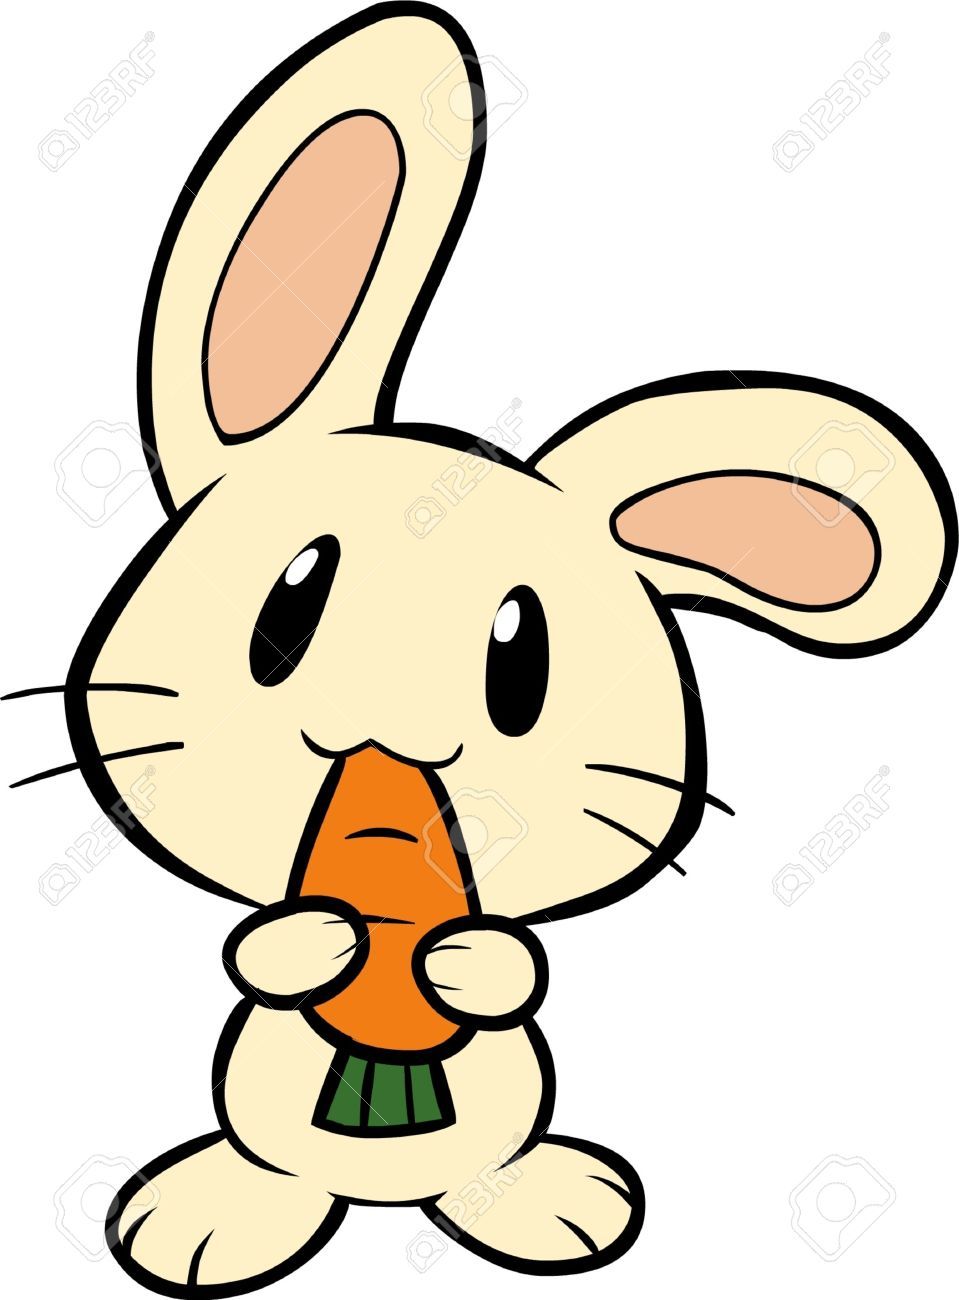 Characters clipart bunny. Vector eating a carrot